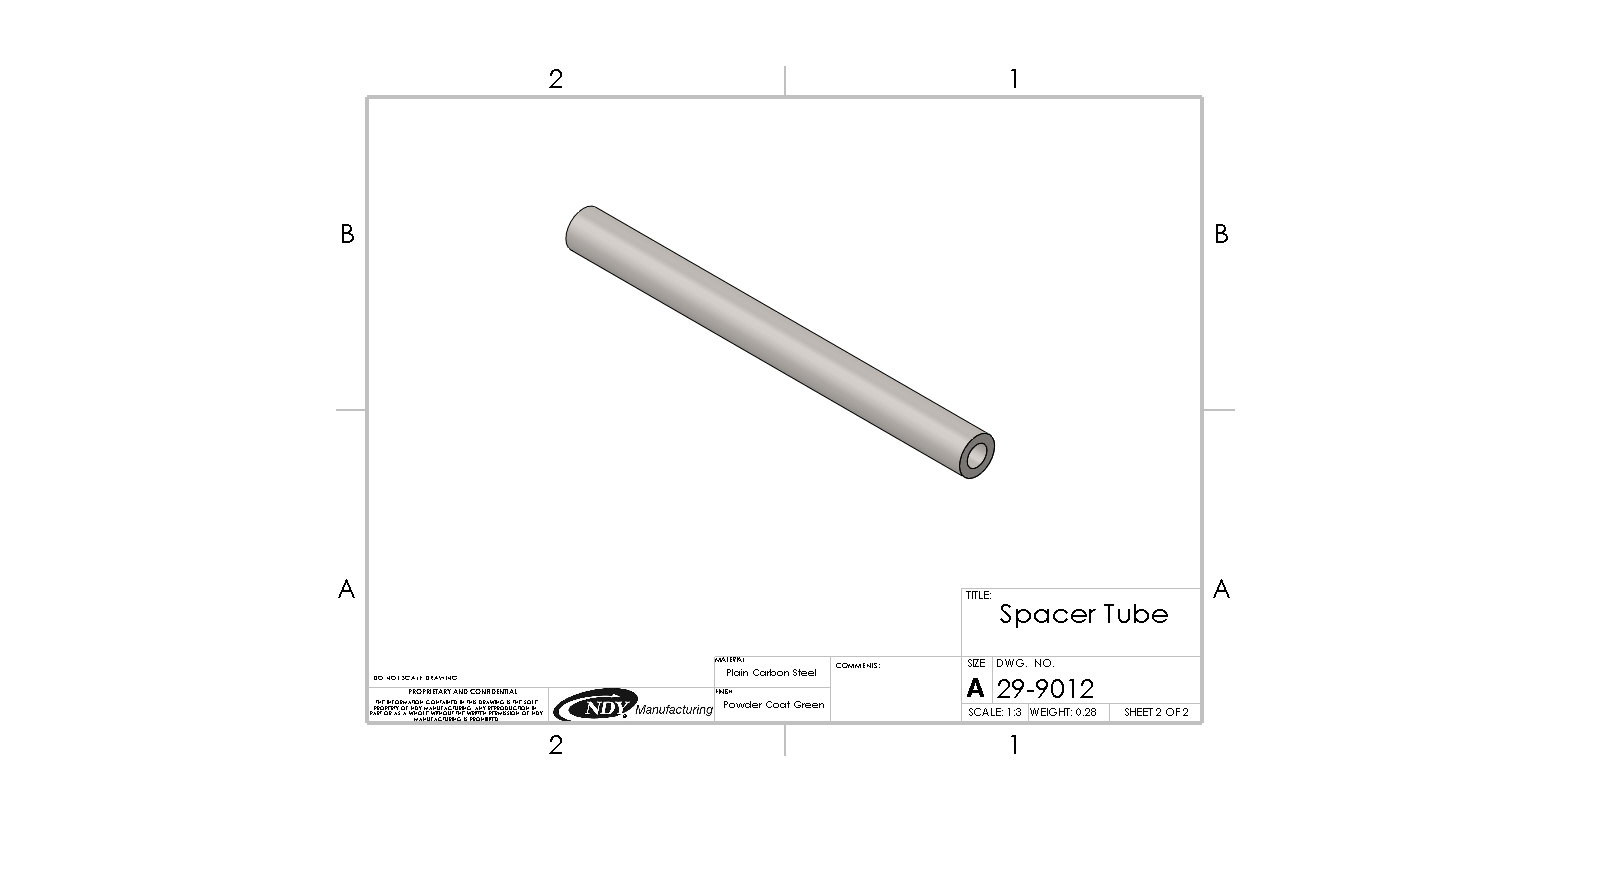 A drawing of a Rock Box Spacer Tube for John Deere 800 Series Without Weights on a sheet of paper.